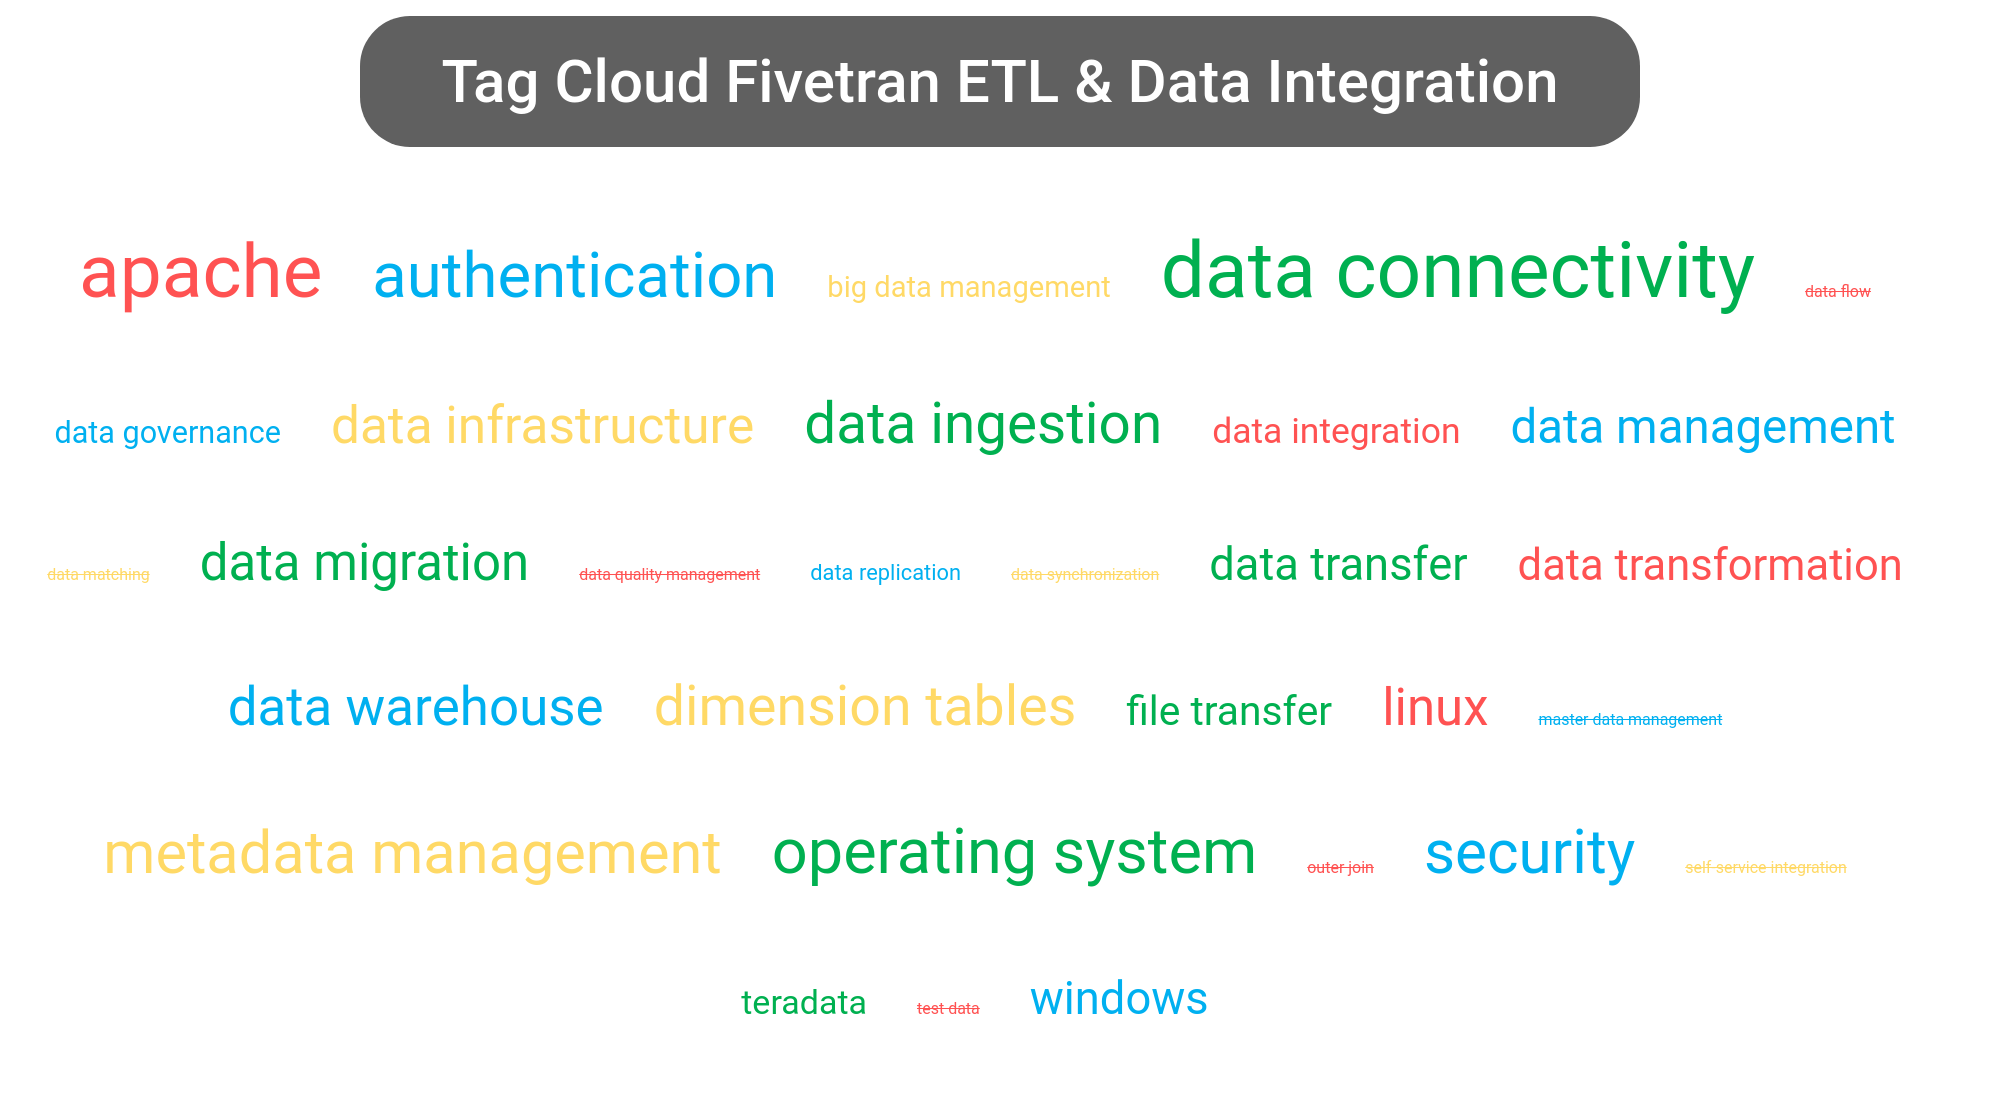 Tag cloud of the Fivetran System software.